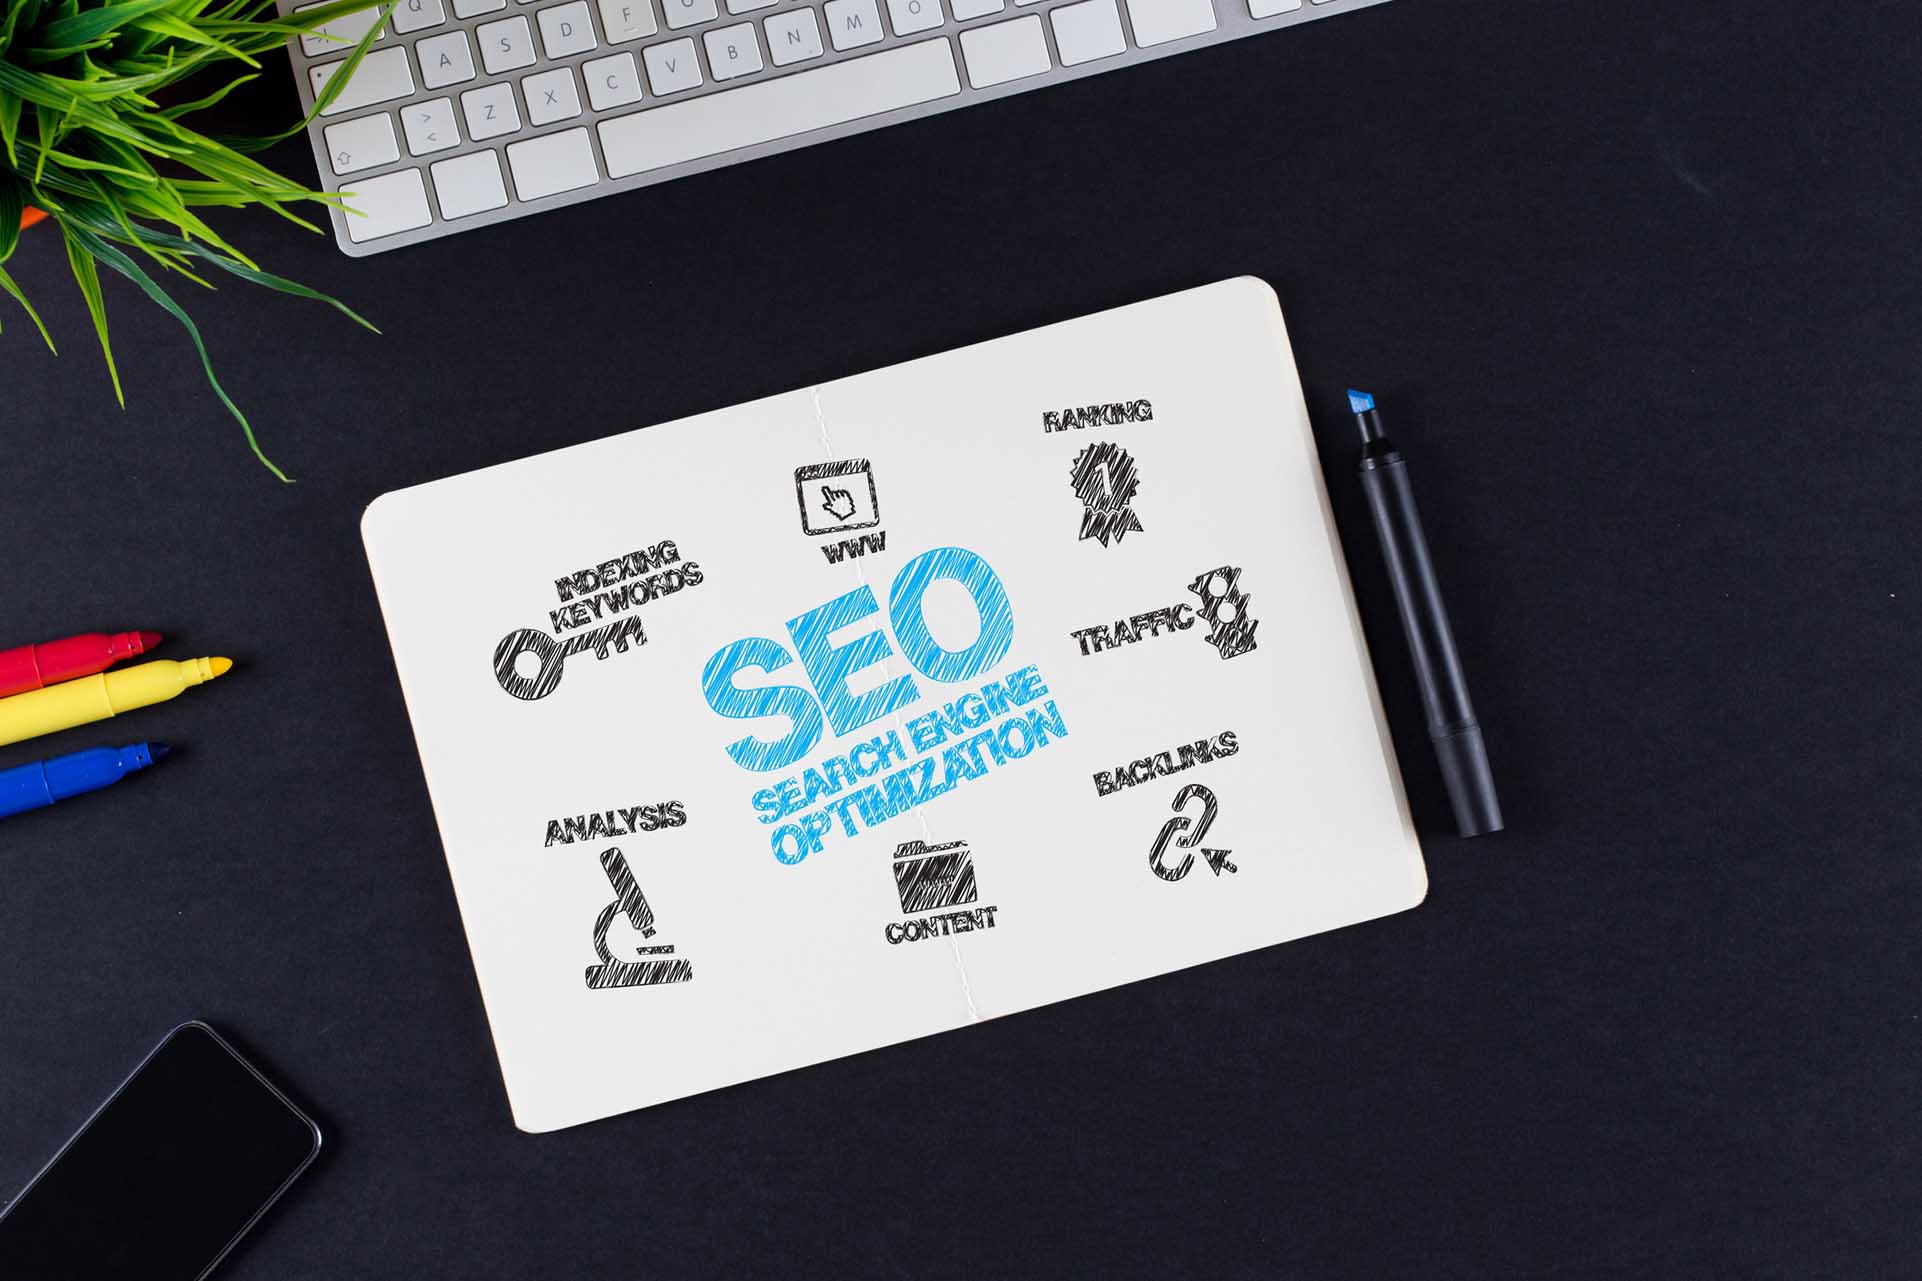 SEO Basics - A Guide of SEO Best Practices for Beginners